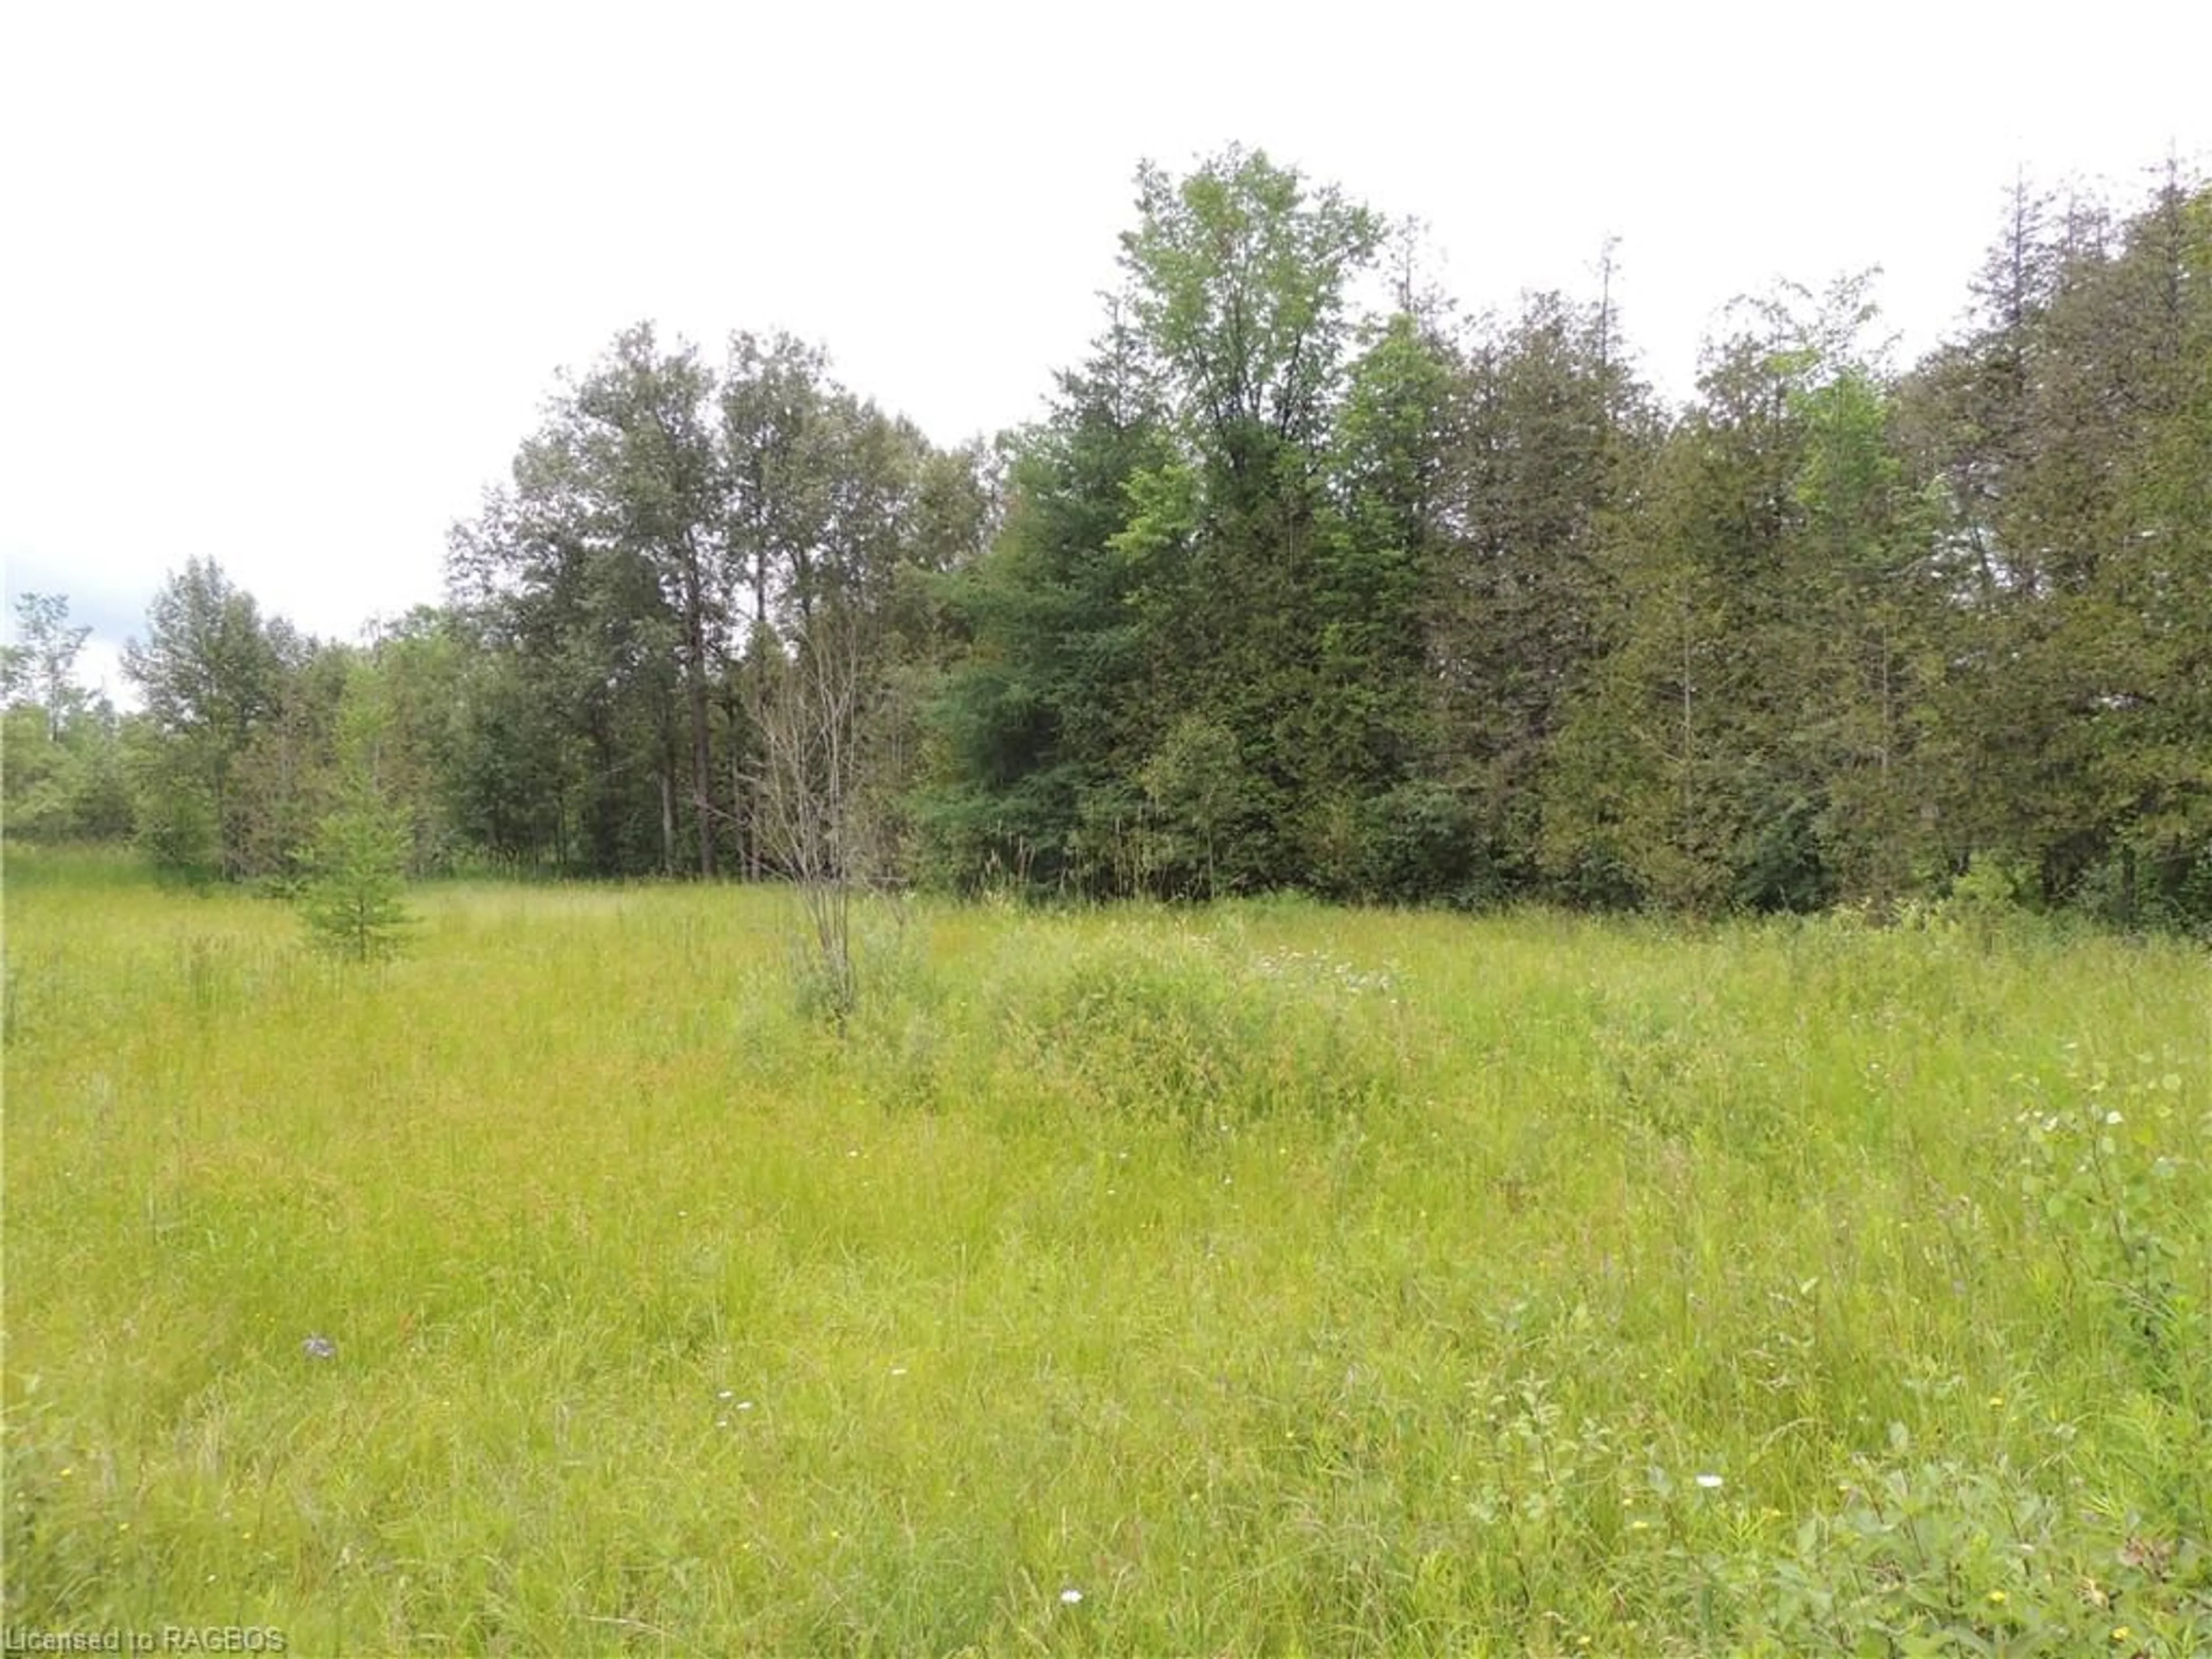 Forest view for 620420 Robson Rd, Chatsworth (Twp) Ontario N0H 1R0